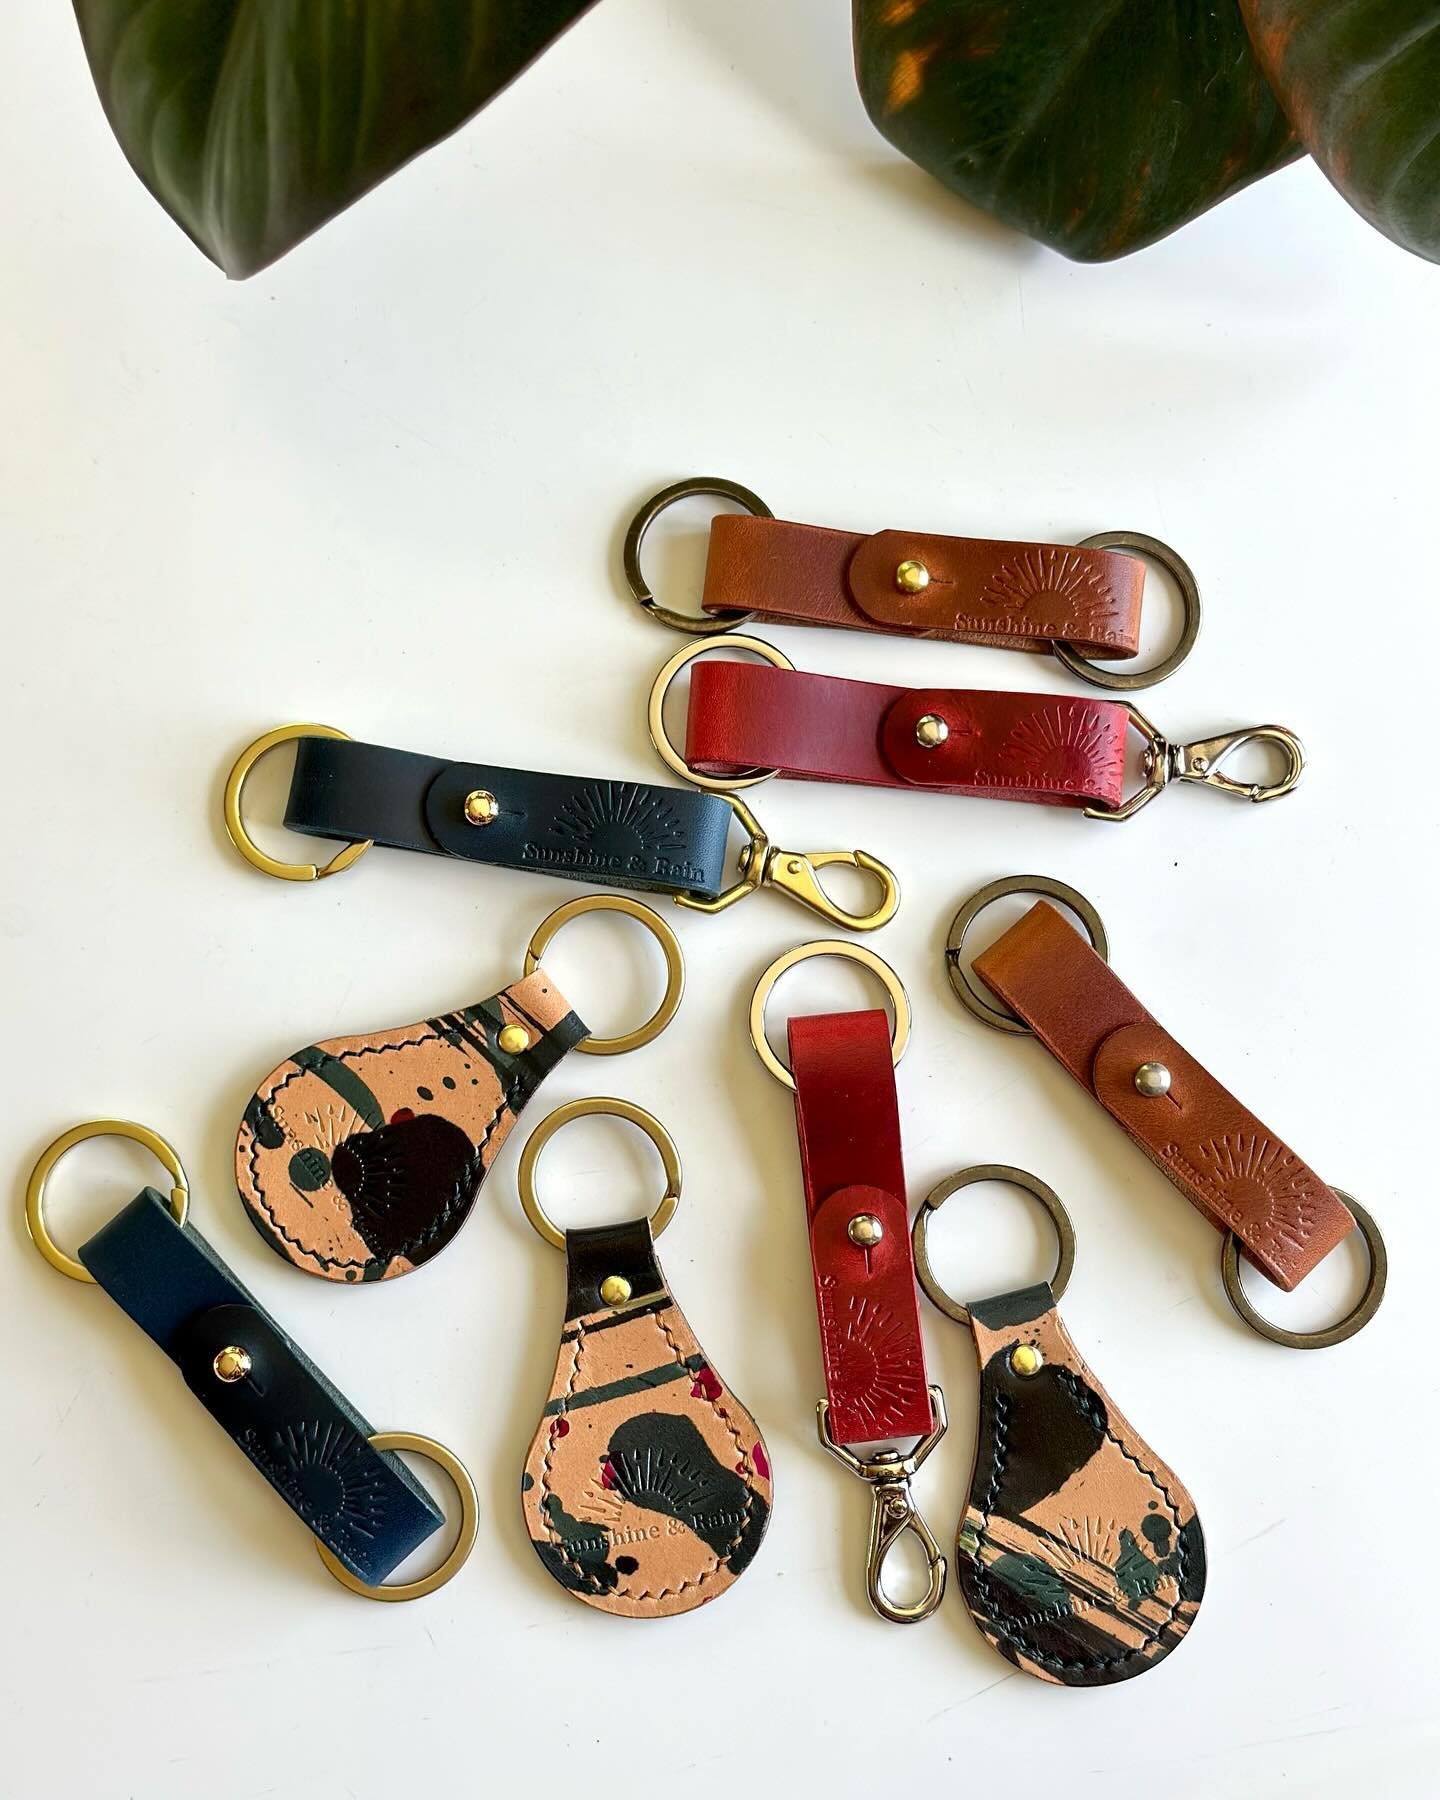 Keychains are actually extremely cool because they are made from scraps. 🔥 😎

#slowmade #reducereuserecycle #leathercraft #keychain #handmadeleathergoods #leather #vegtan #handsewnleather #thatscool